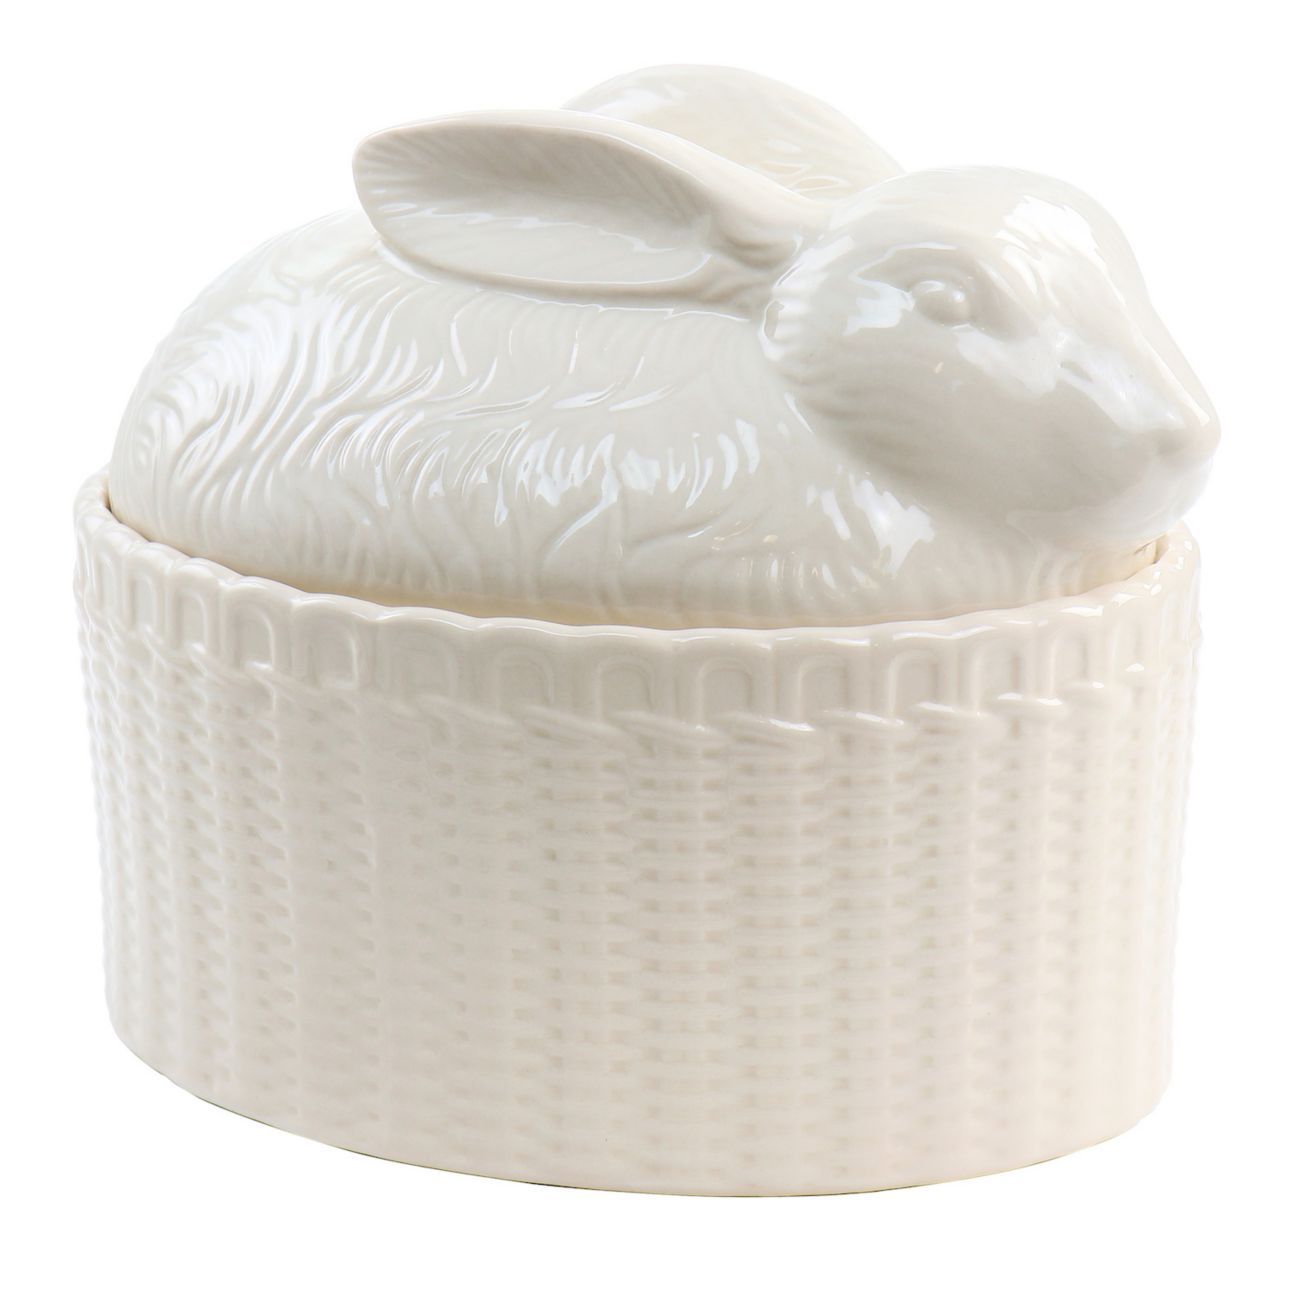 Gibson Everyday 9 Inch Stoneware Sculpted Bunny Covered Oval Baker in Cream | Walmart (US)